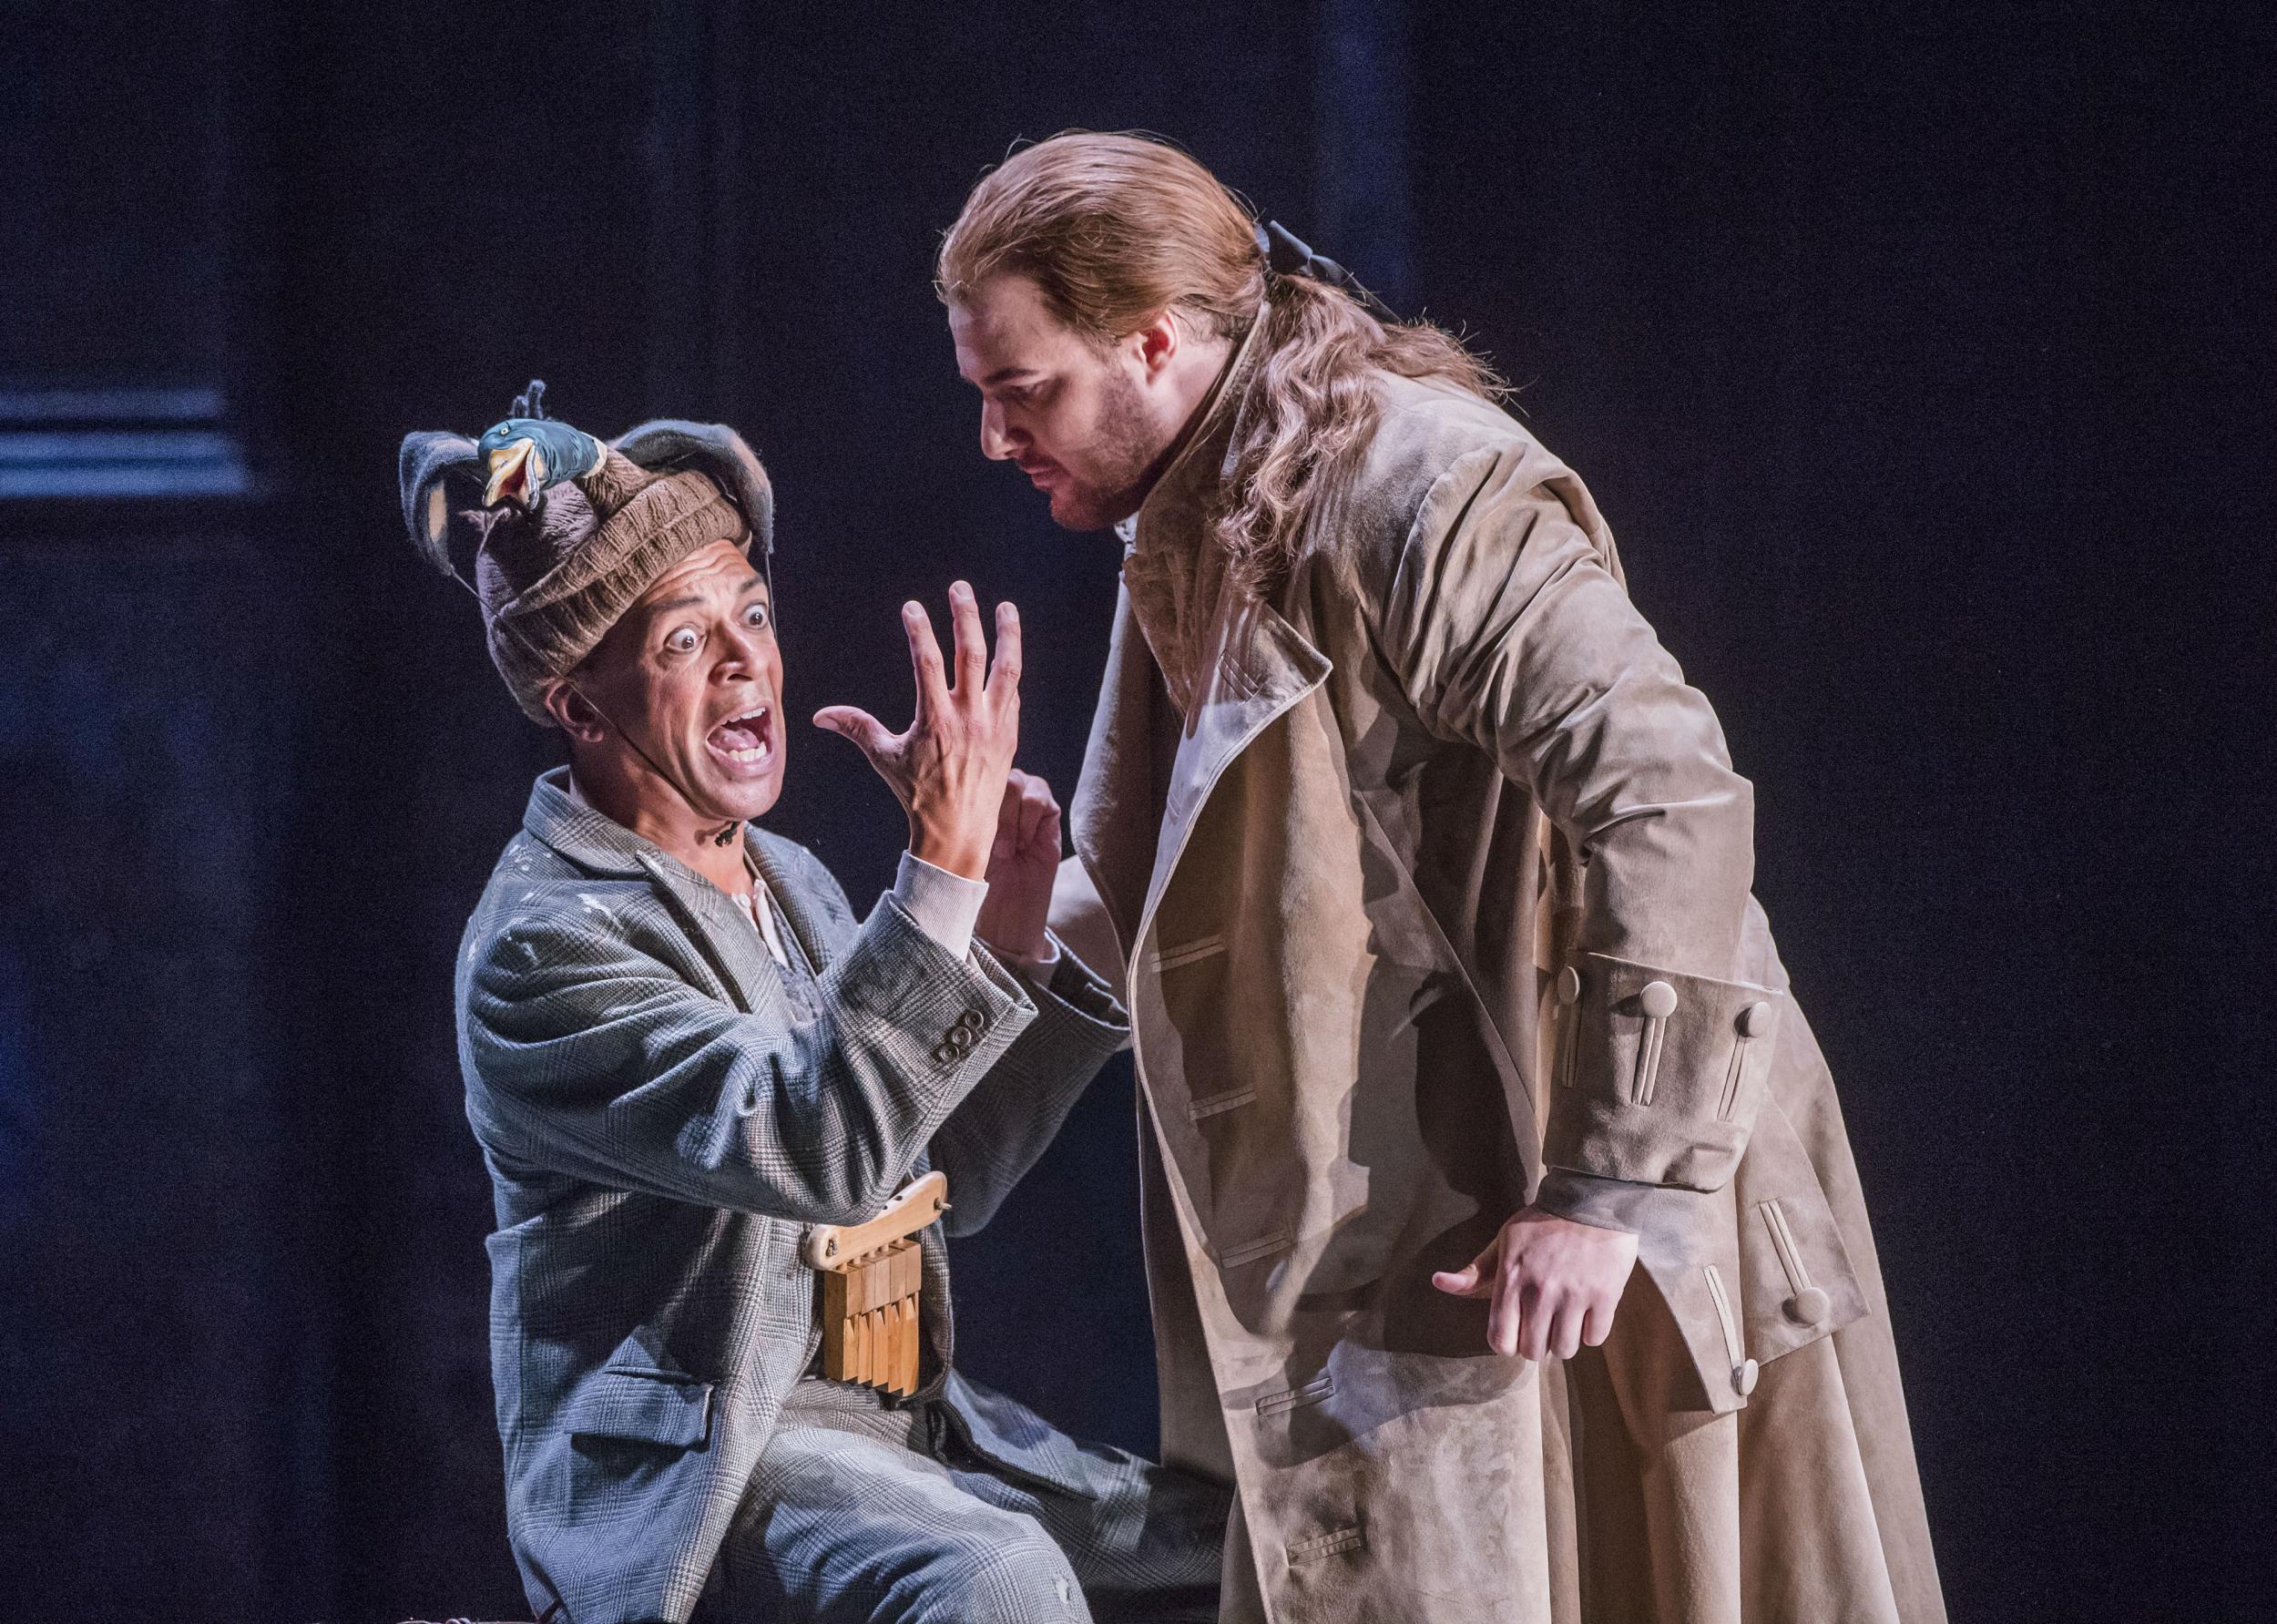 Roderick Williams (left) gives his comic all as Papageno while Mauro Peter makes a regal Tamino